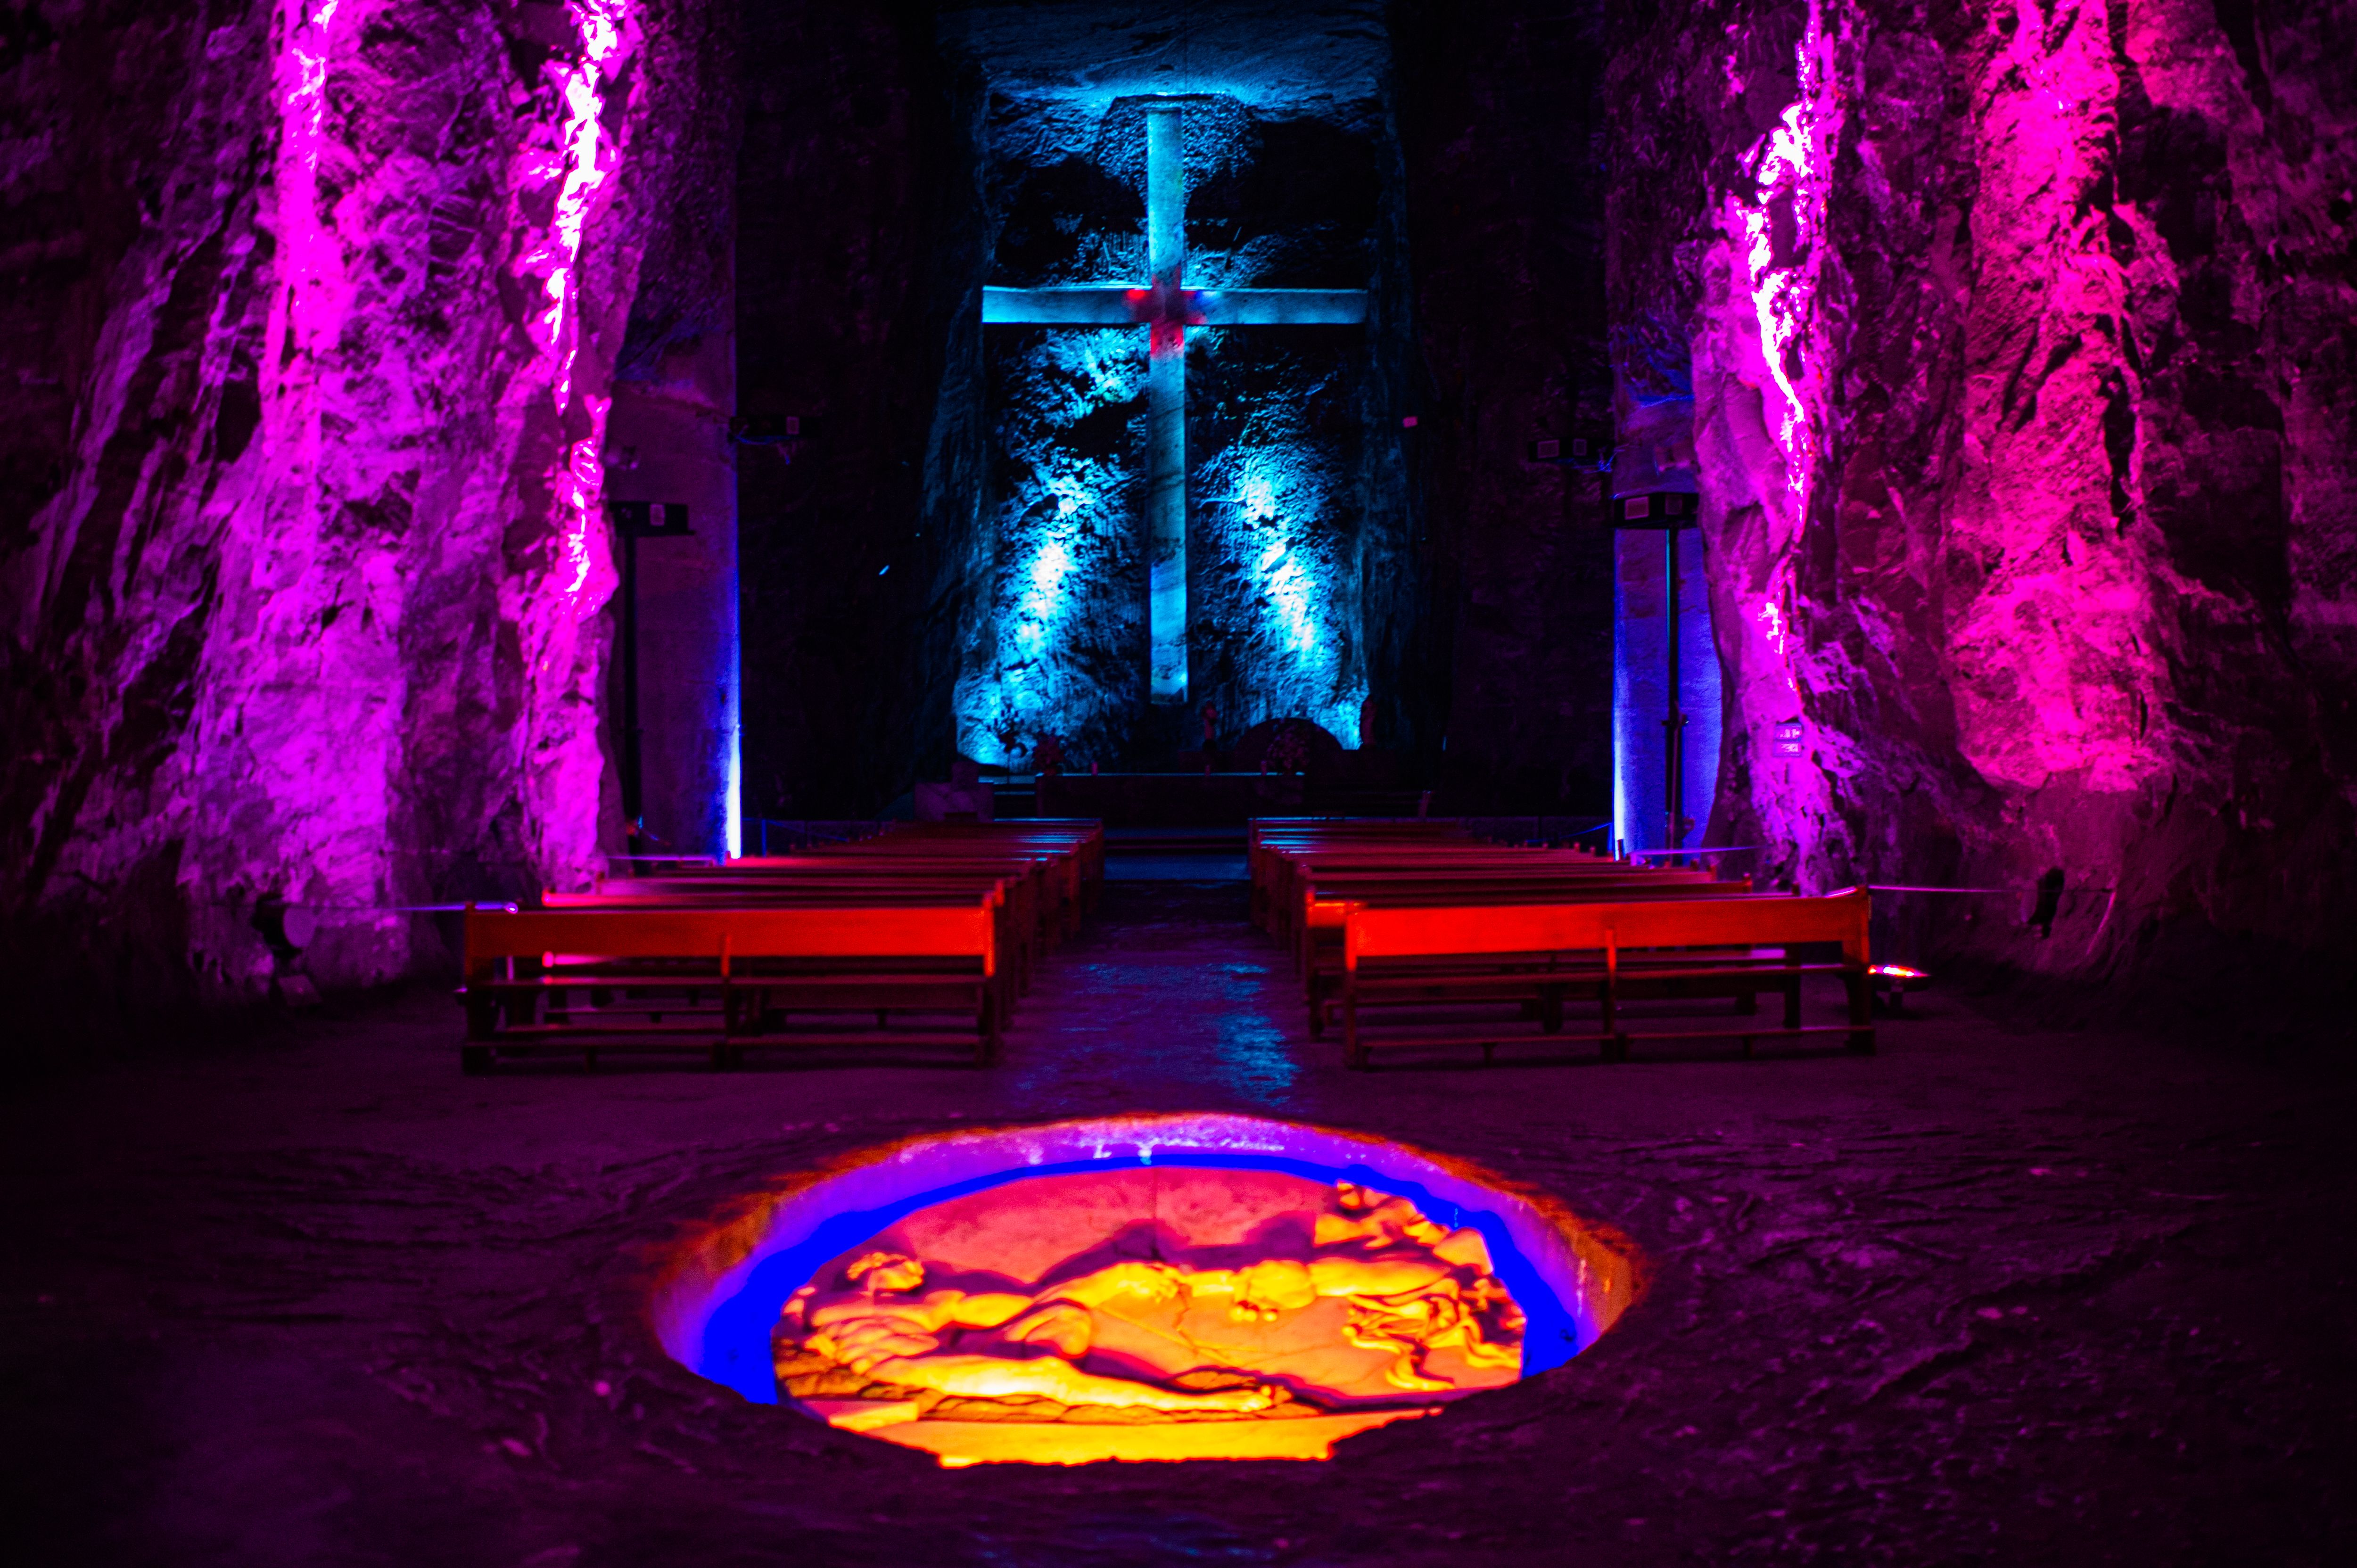 Salt Cathedral of Zipaquira in Colombia as the worlds largest underground Nativity Scene prepares for the Christmas season.